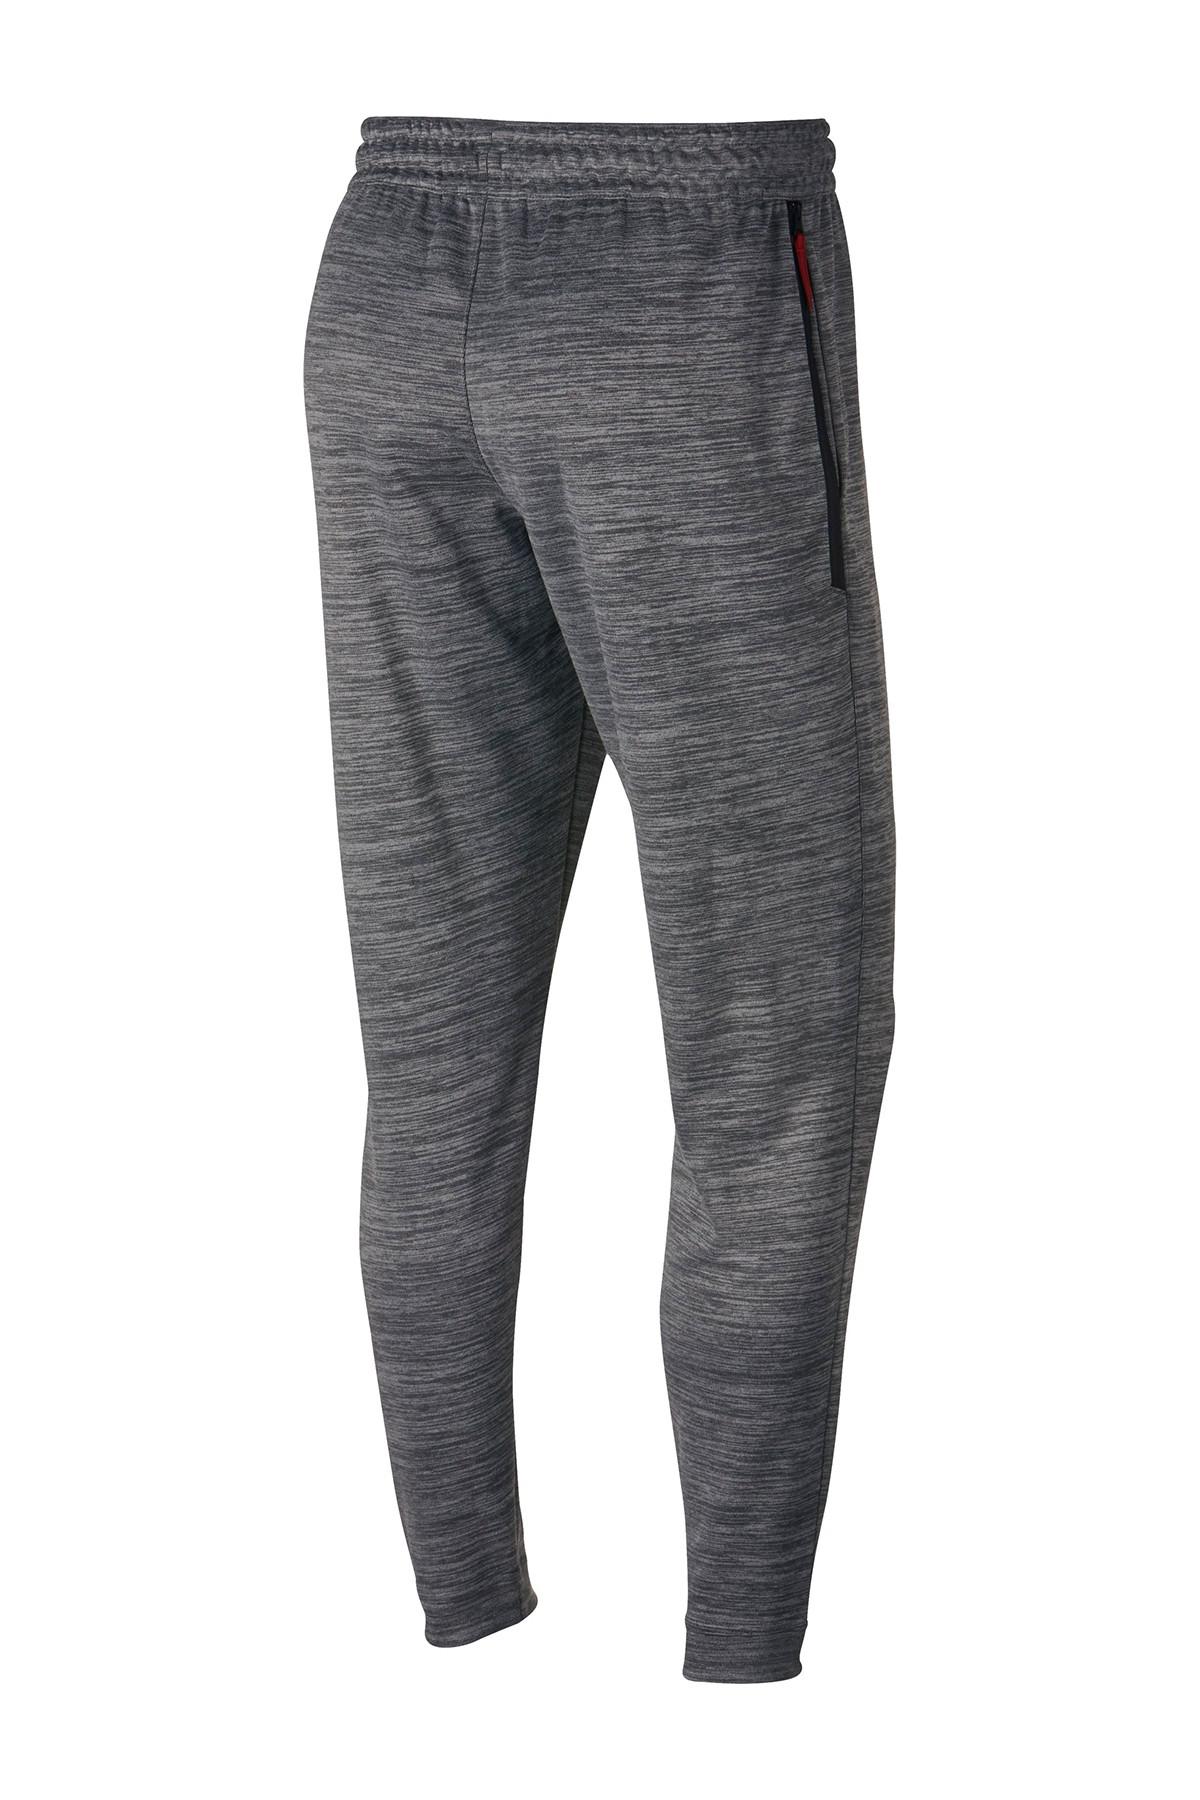 Nike Synthetic Spotlight Tapered Sweatpants in Grey h/Black (Gray) for ...